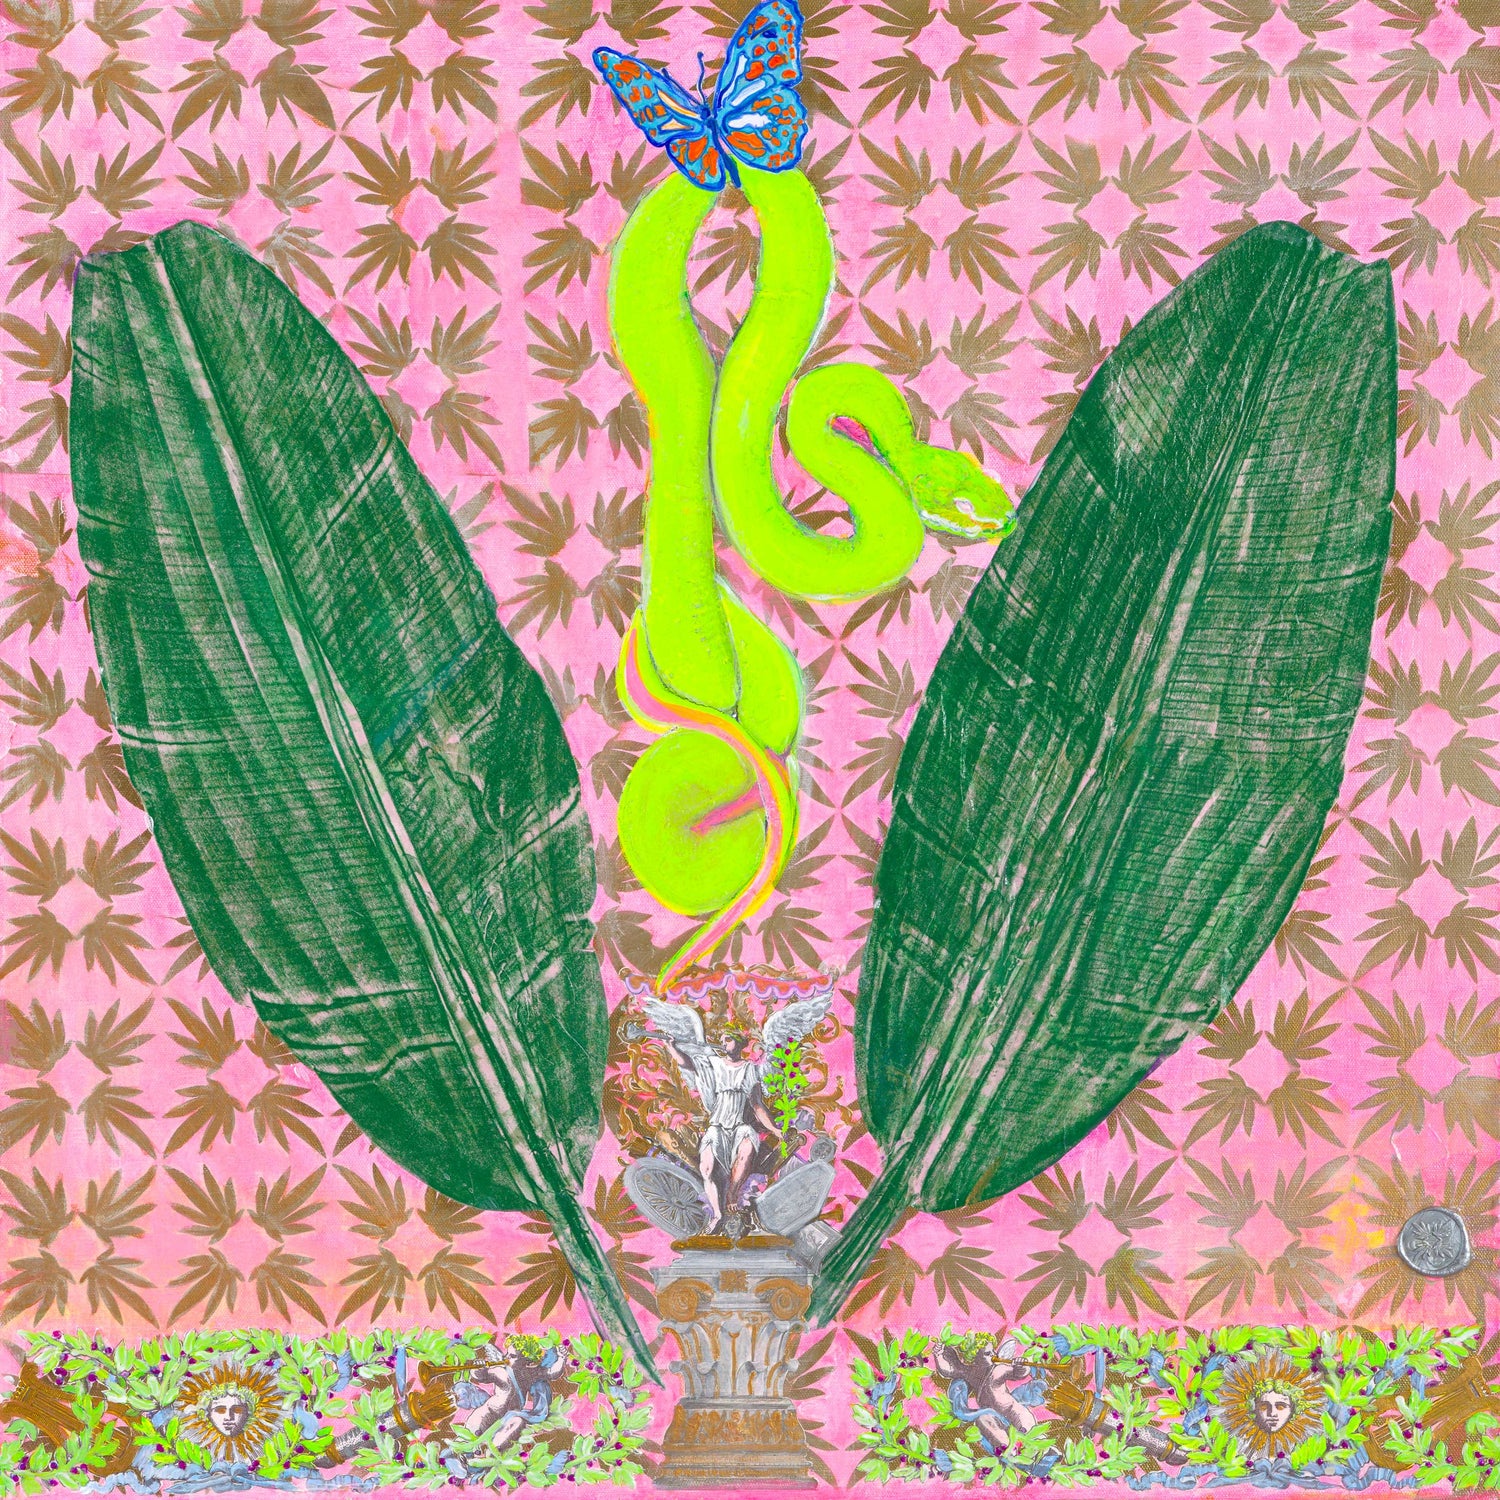 Green banana leaves and a bright green asp with a blue butterfly and neoclassical ornament including the archangel Gabriel, columns, and Palladian ornament.